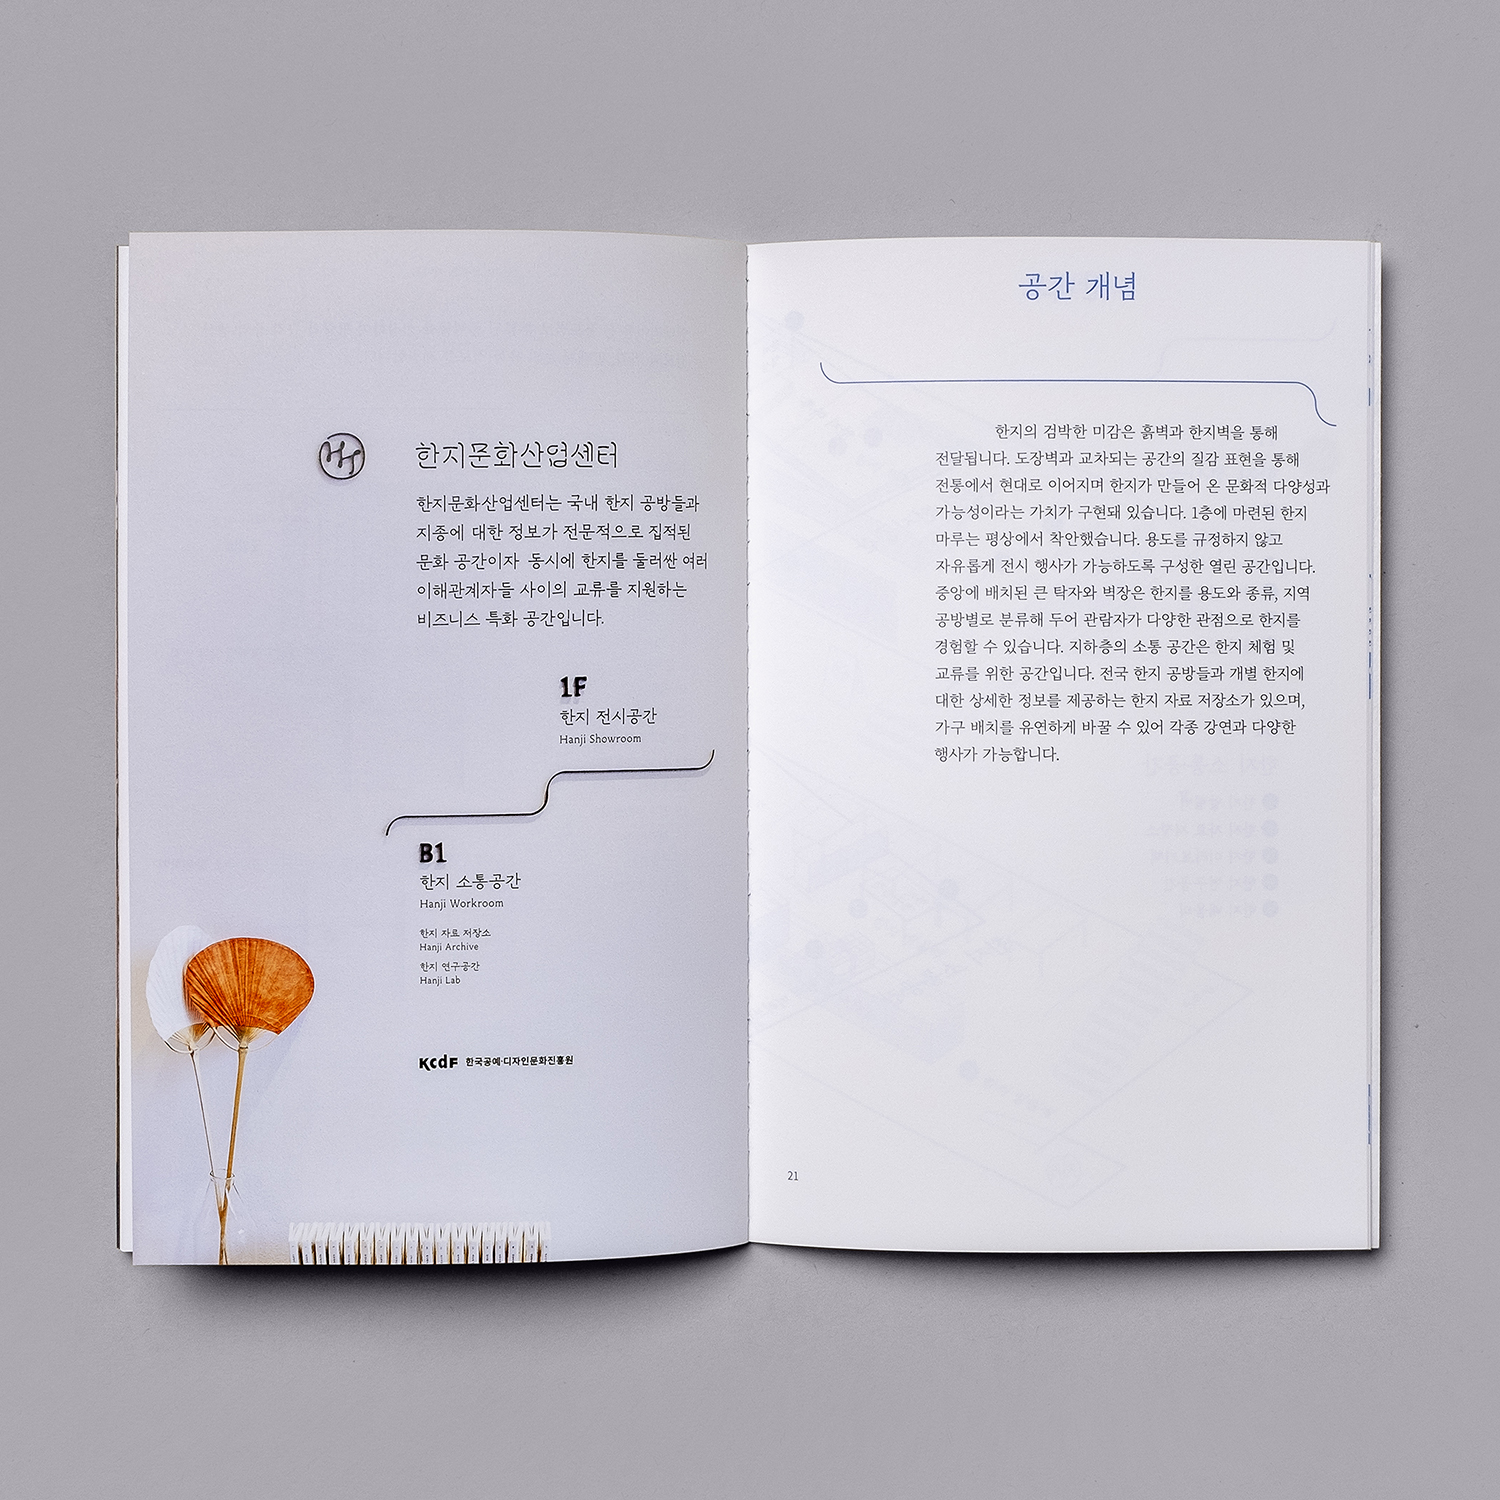 Logo, stamps, guides and wayfinding by Studio fnt for Korean paper brand Hanji